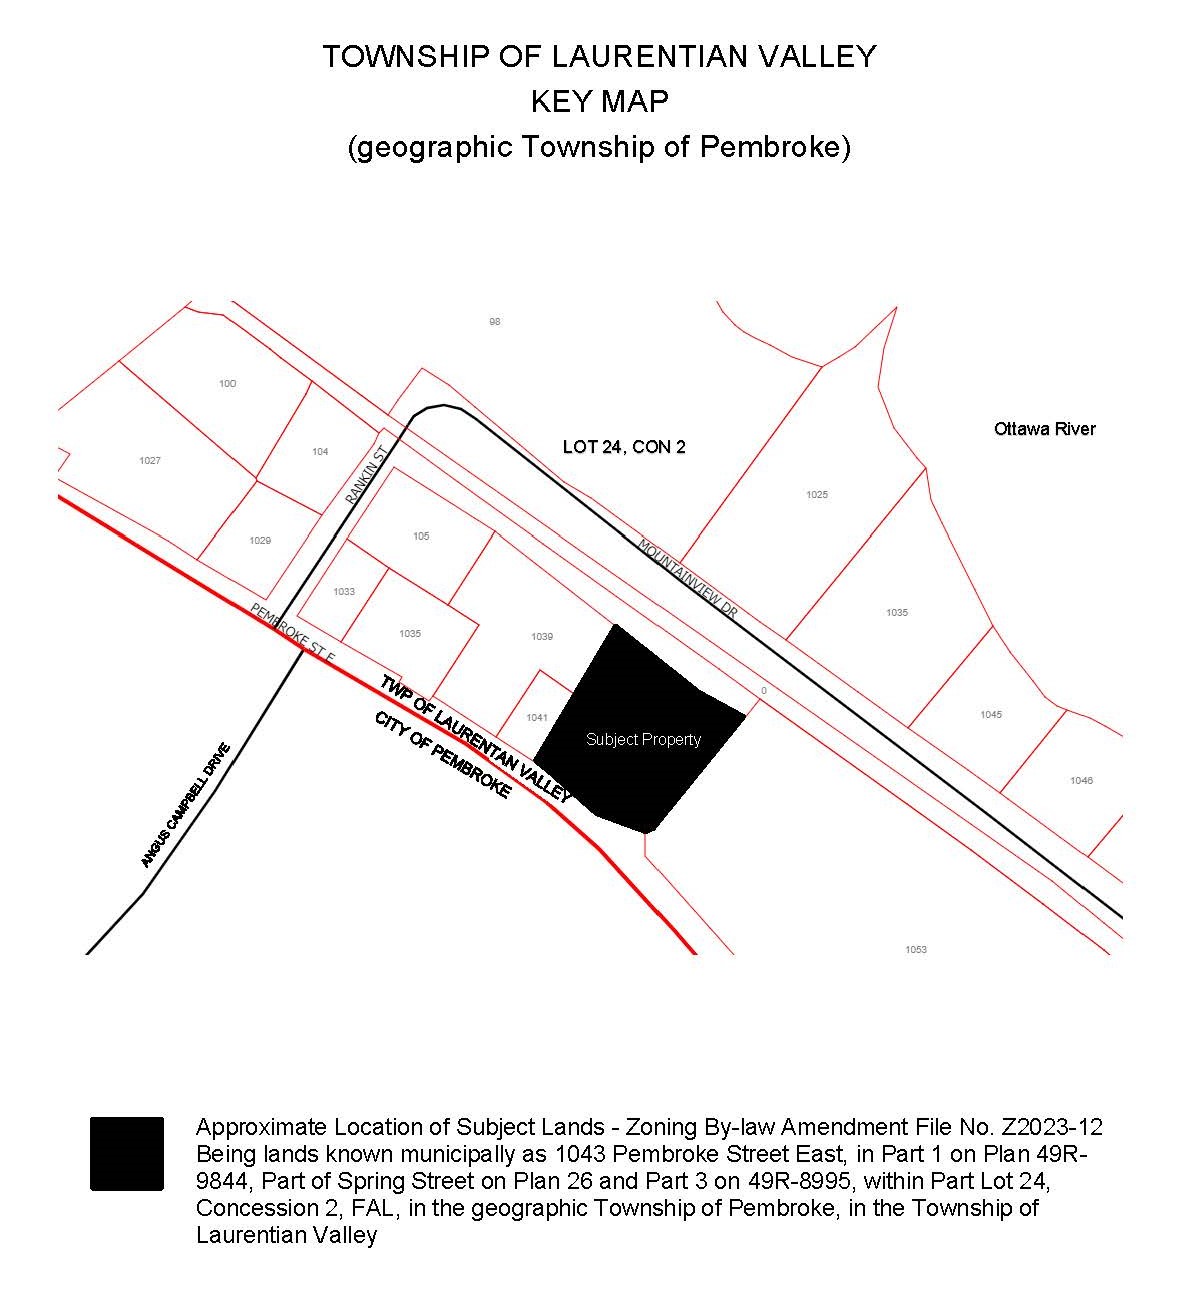 Key map of Zoning by-law amendment file no. Z2023-12.